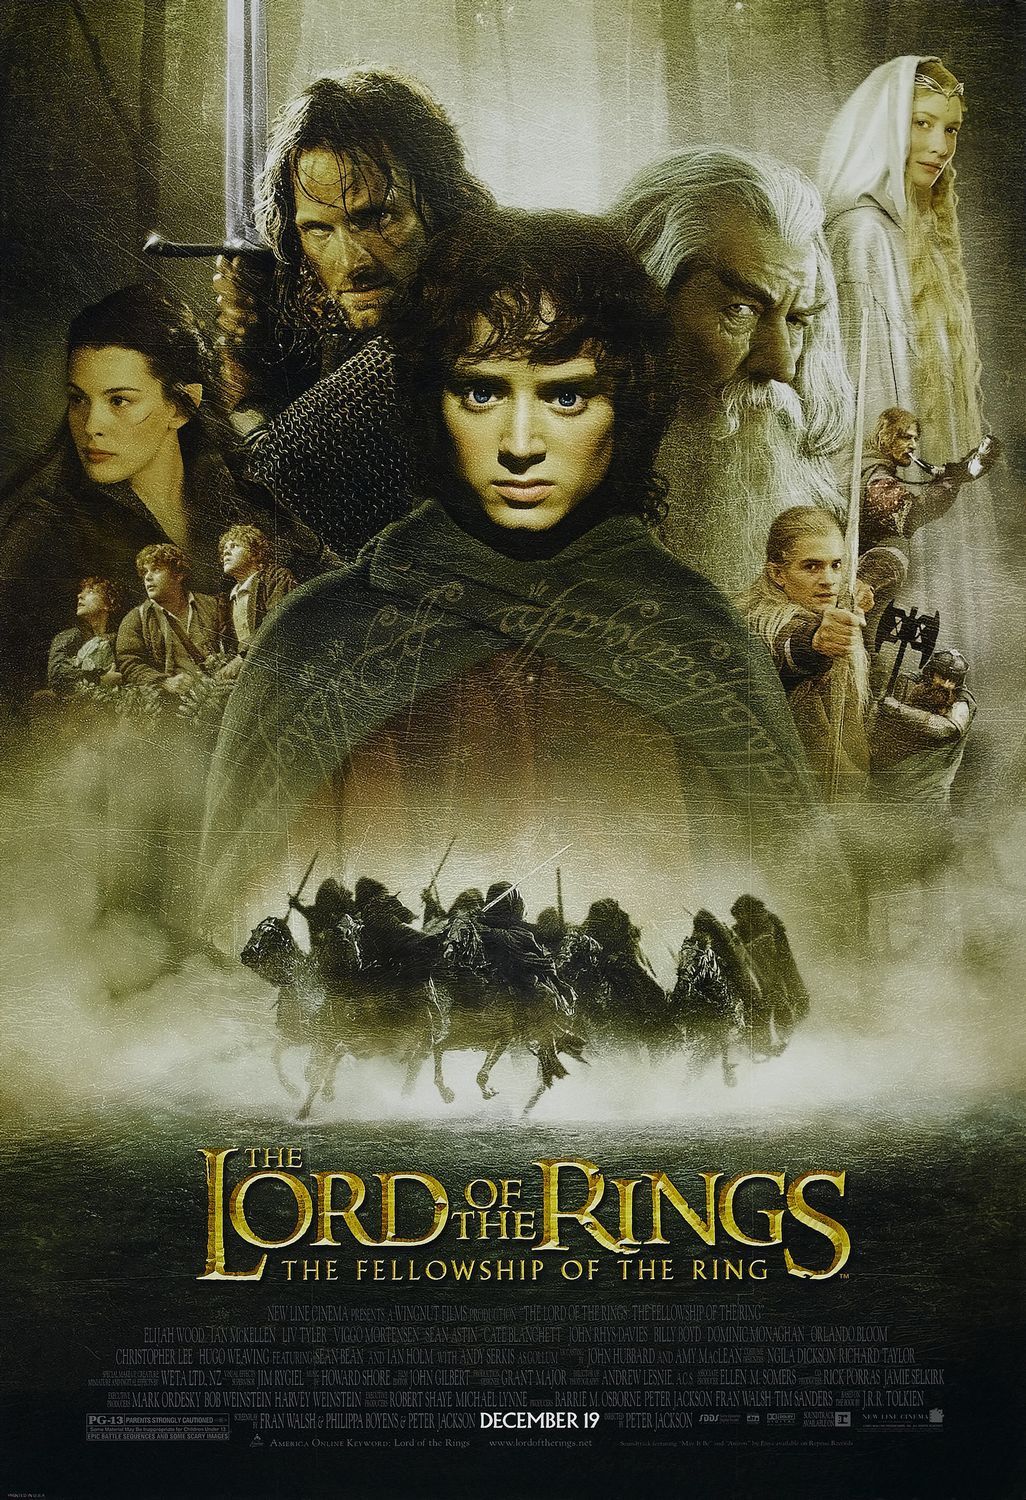 Complete The Lord of the Rings Trilogy 1-3 + Complete The Hobbit Trilogy  1-3 movie collection | The hobbit, Lord of the rings, The hobbit five armies